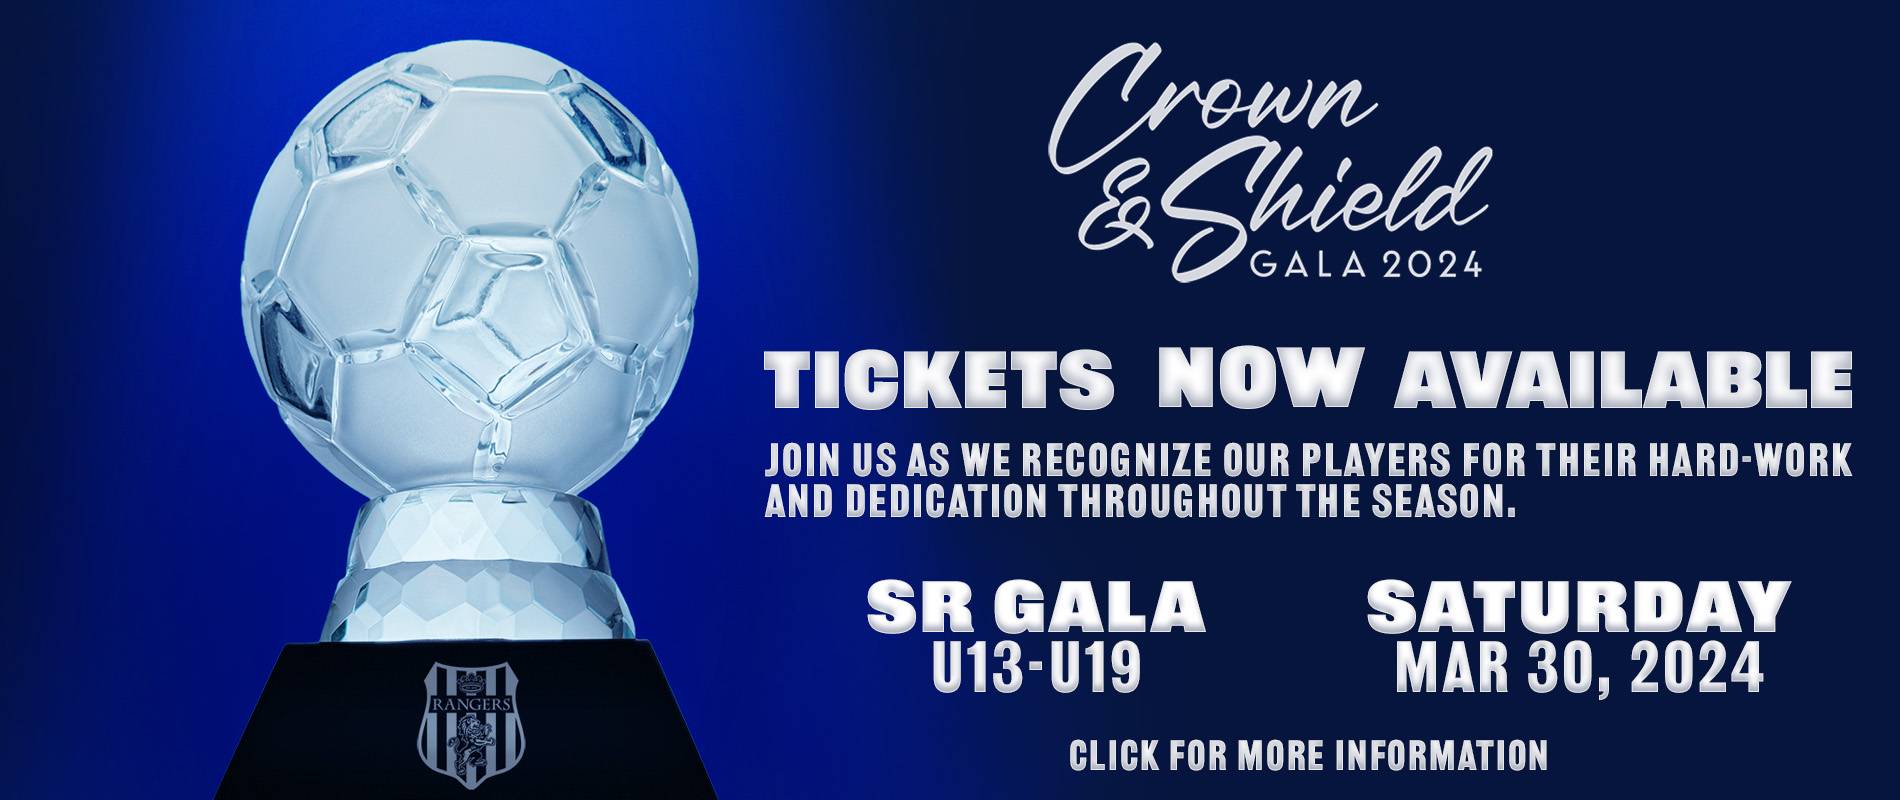 Crown & Shield Gala 2024 Tickets Now Available